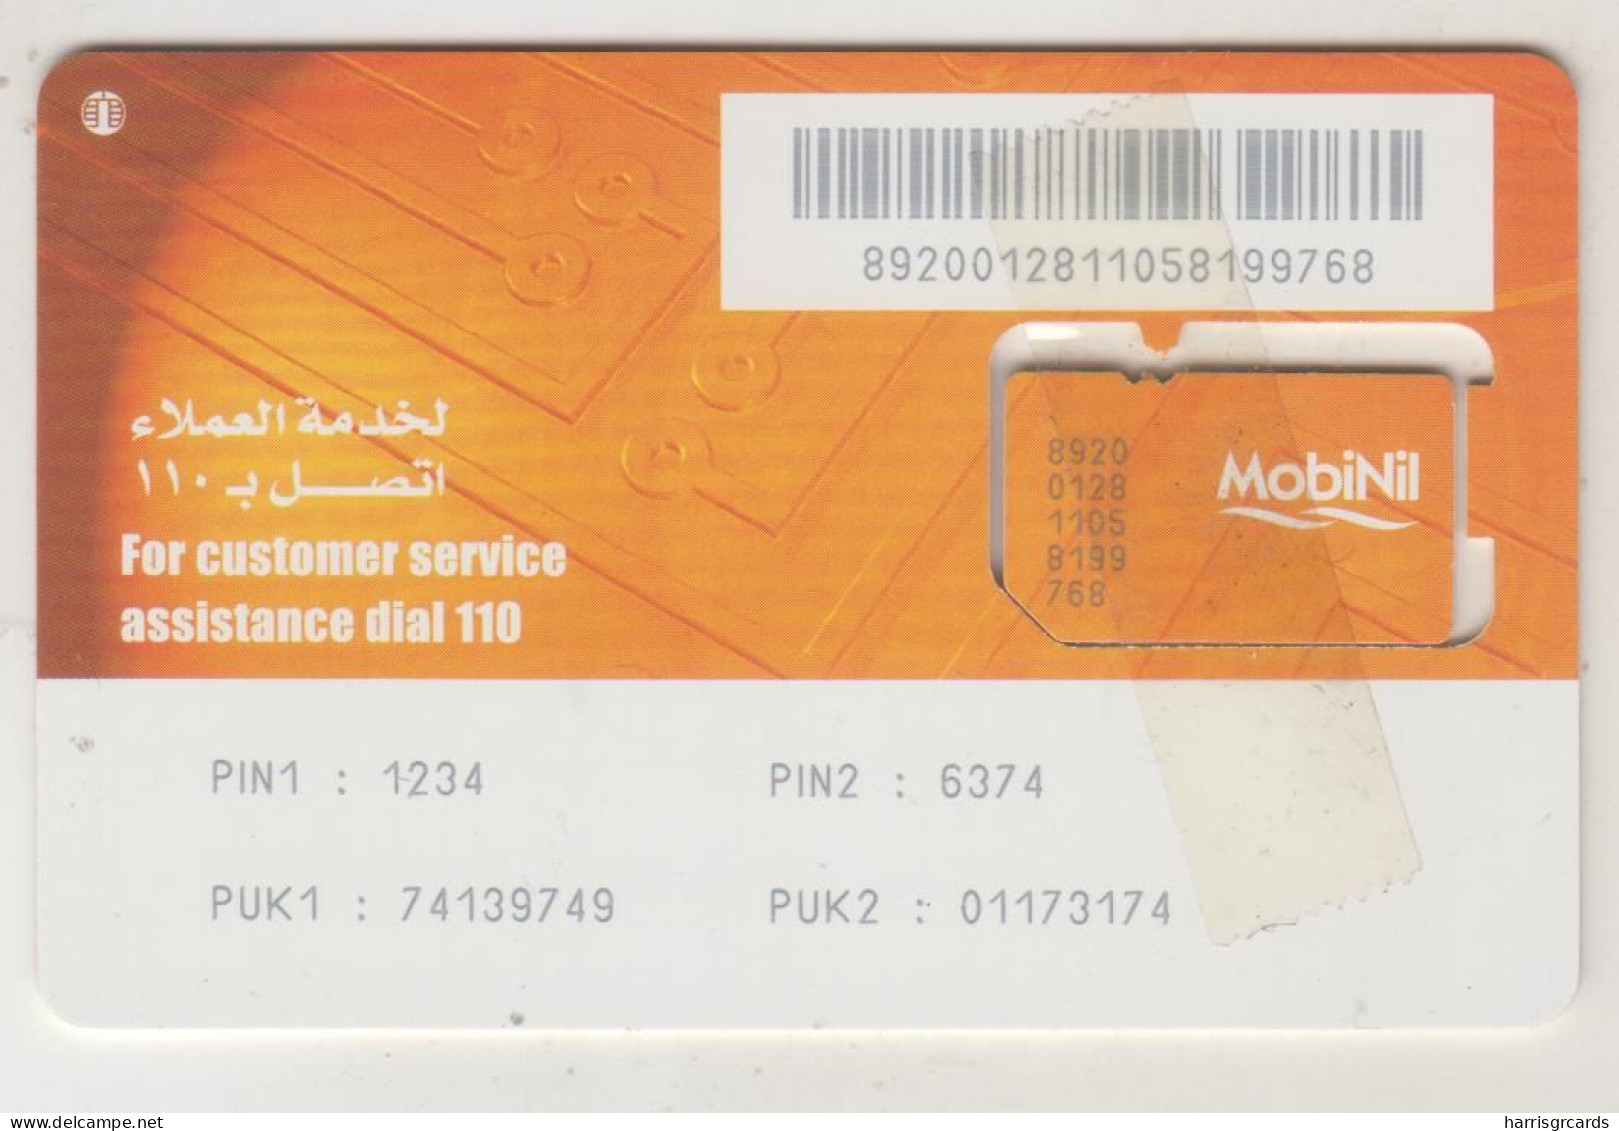 EGYPT - MobiNil GSM Card, Used - Aegypten